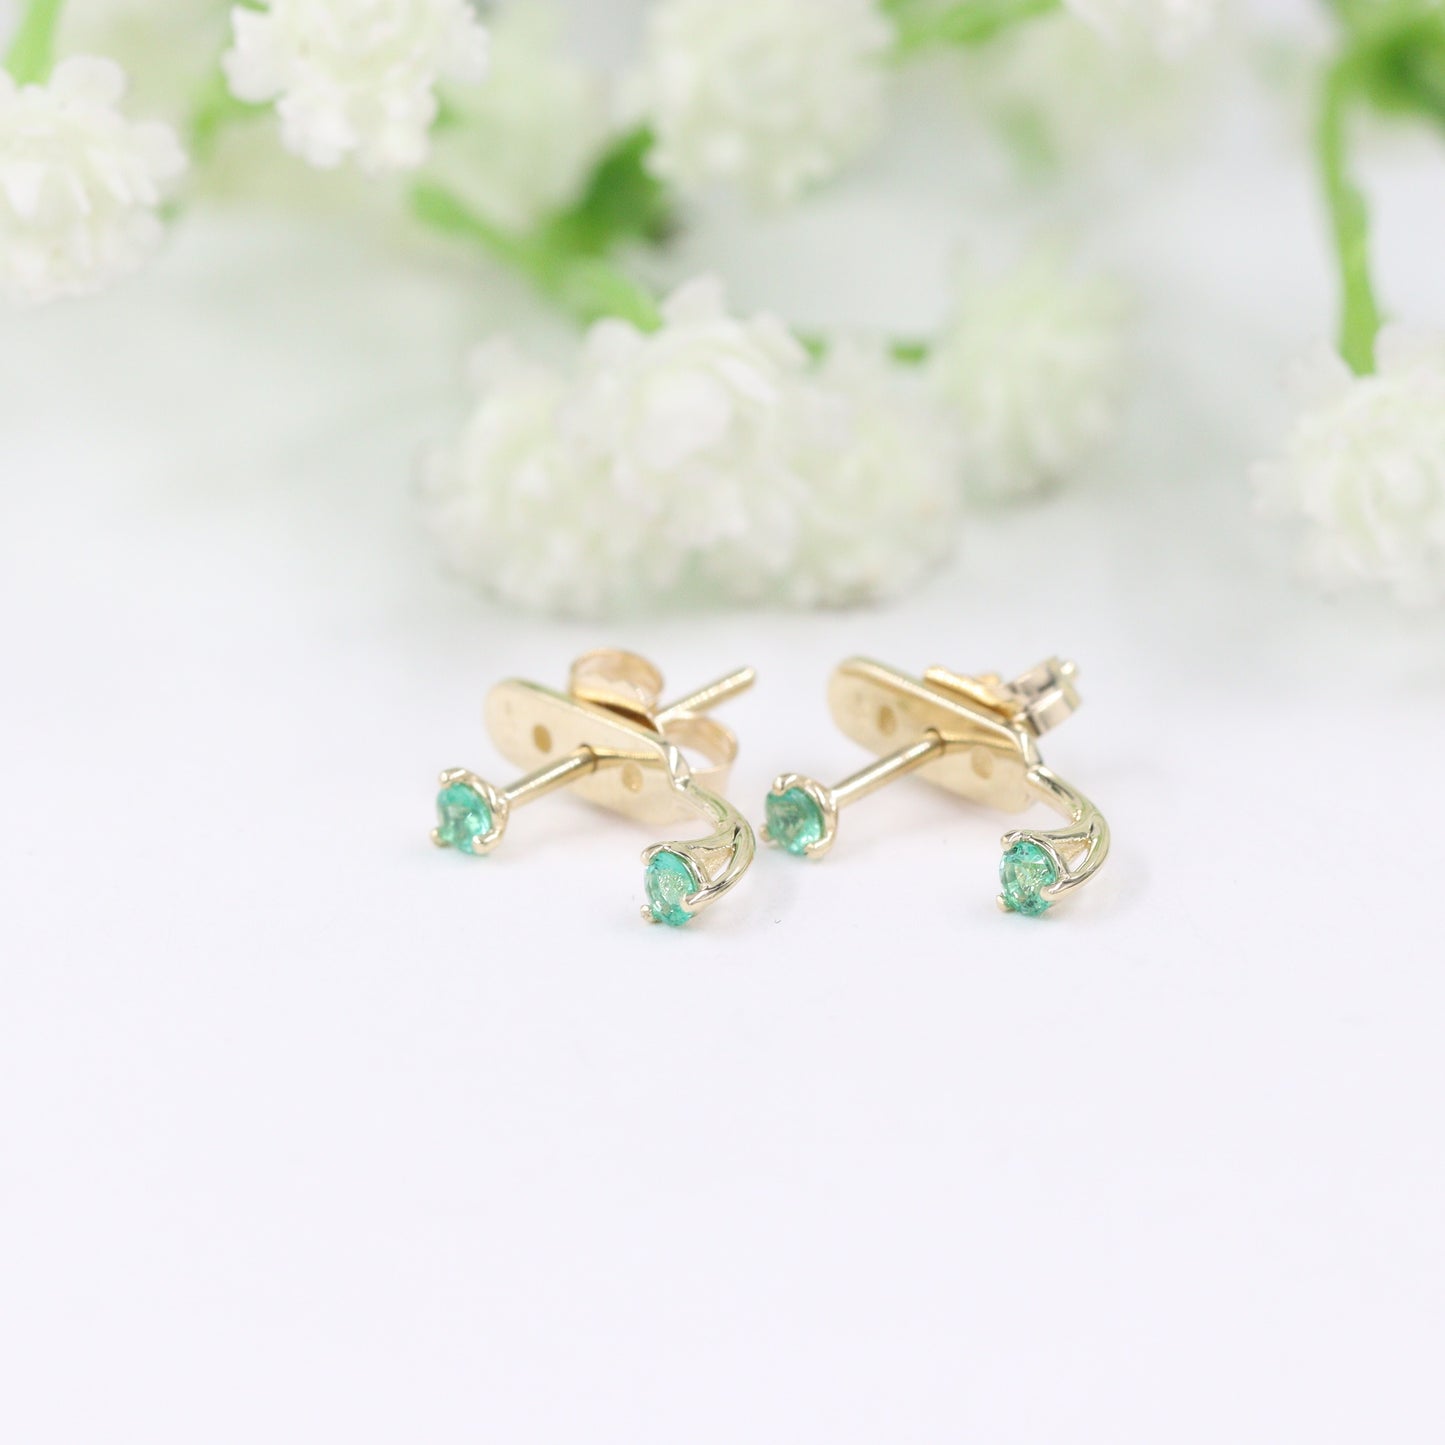 Natural Round Emerald Jacket Earrings 0.1ct/ Three Prong Set Round Emerald Stud Earrings/ Single or Pair Earrings/ Gifts for her